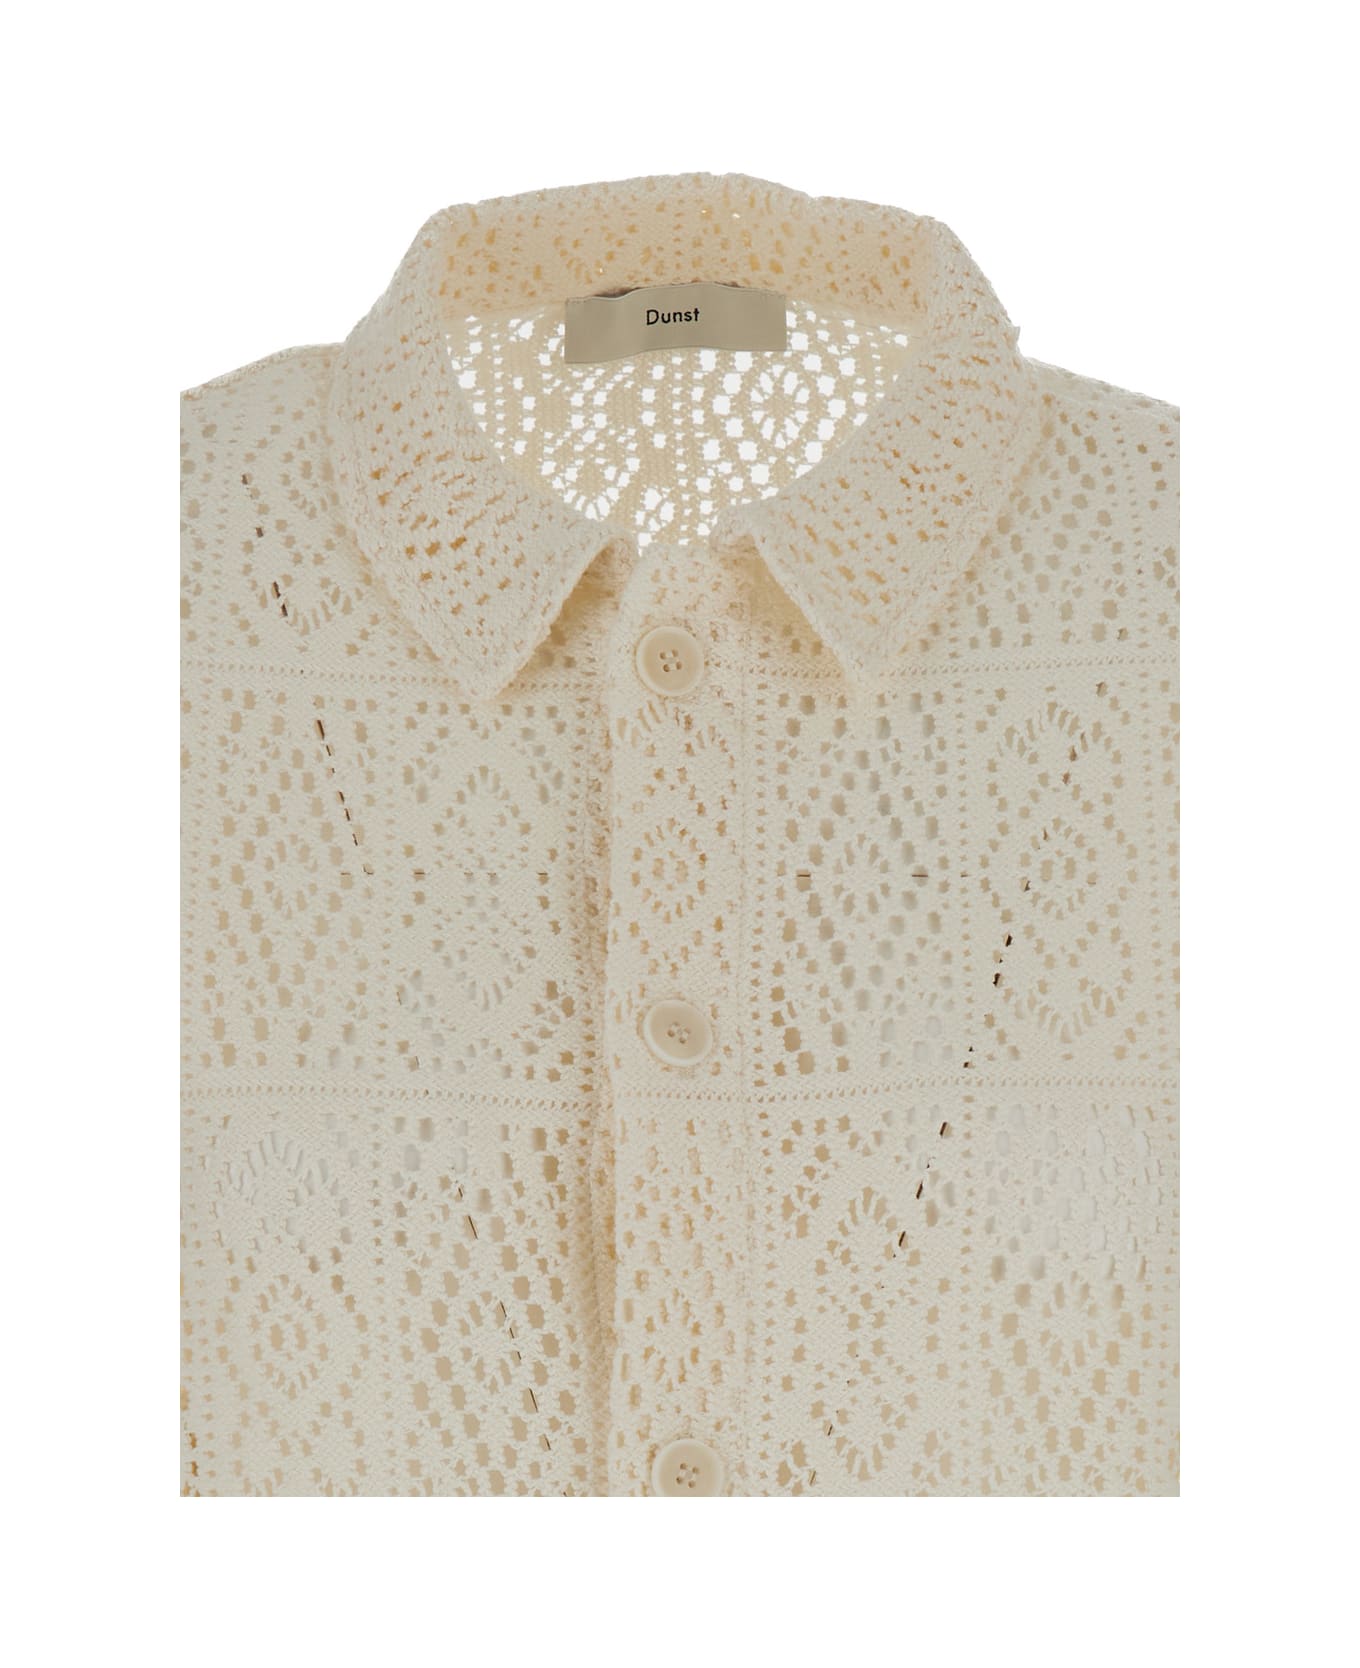 Dunst White Open Knit Work Shirt In Cotton Blend Woman - White